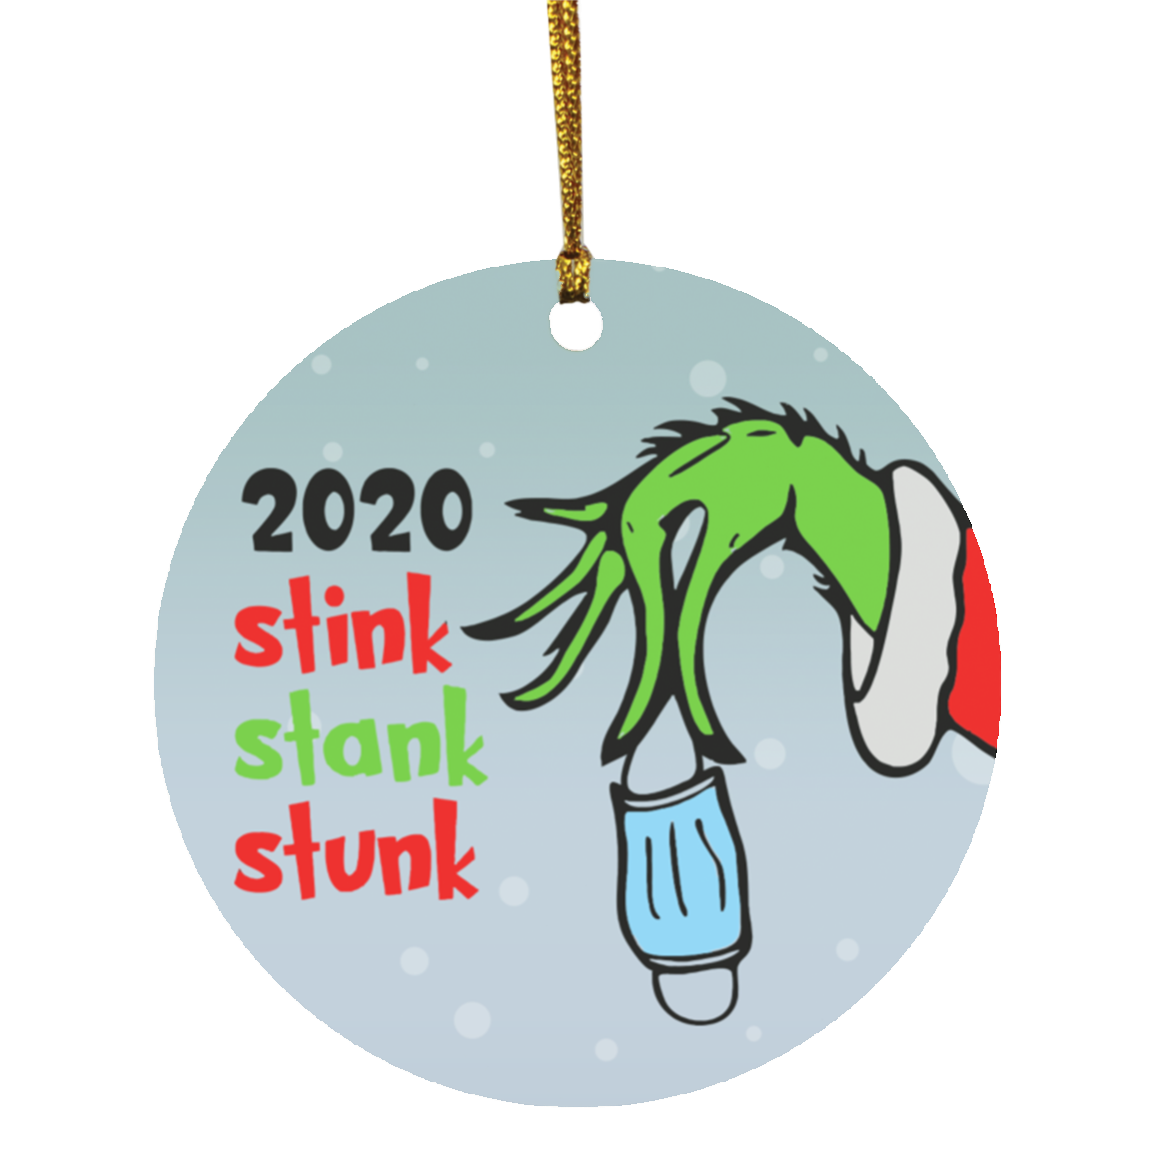 Tactical Xmas Stocking - Family Xmas Stockings with Grinch 2020 Stink Stank Stunk Ornament